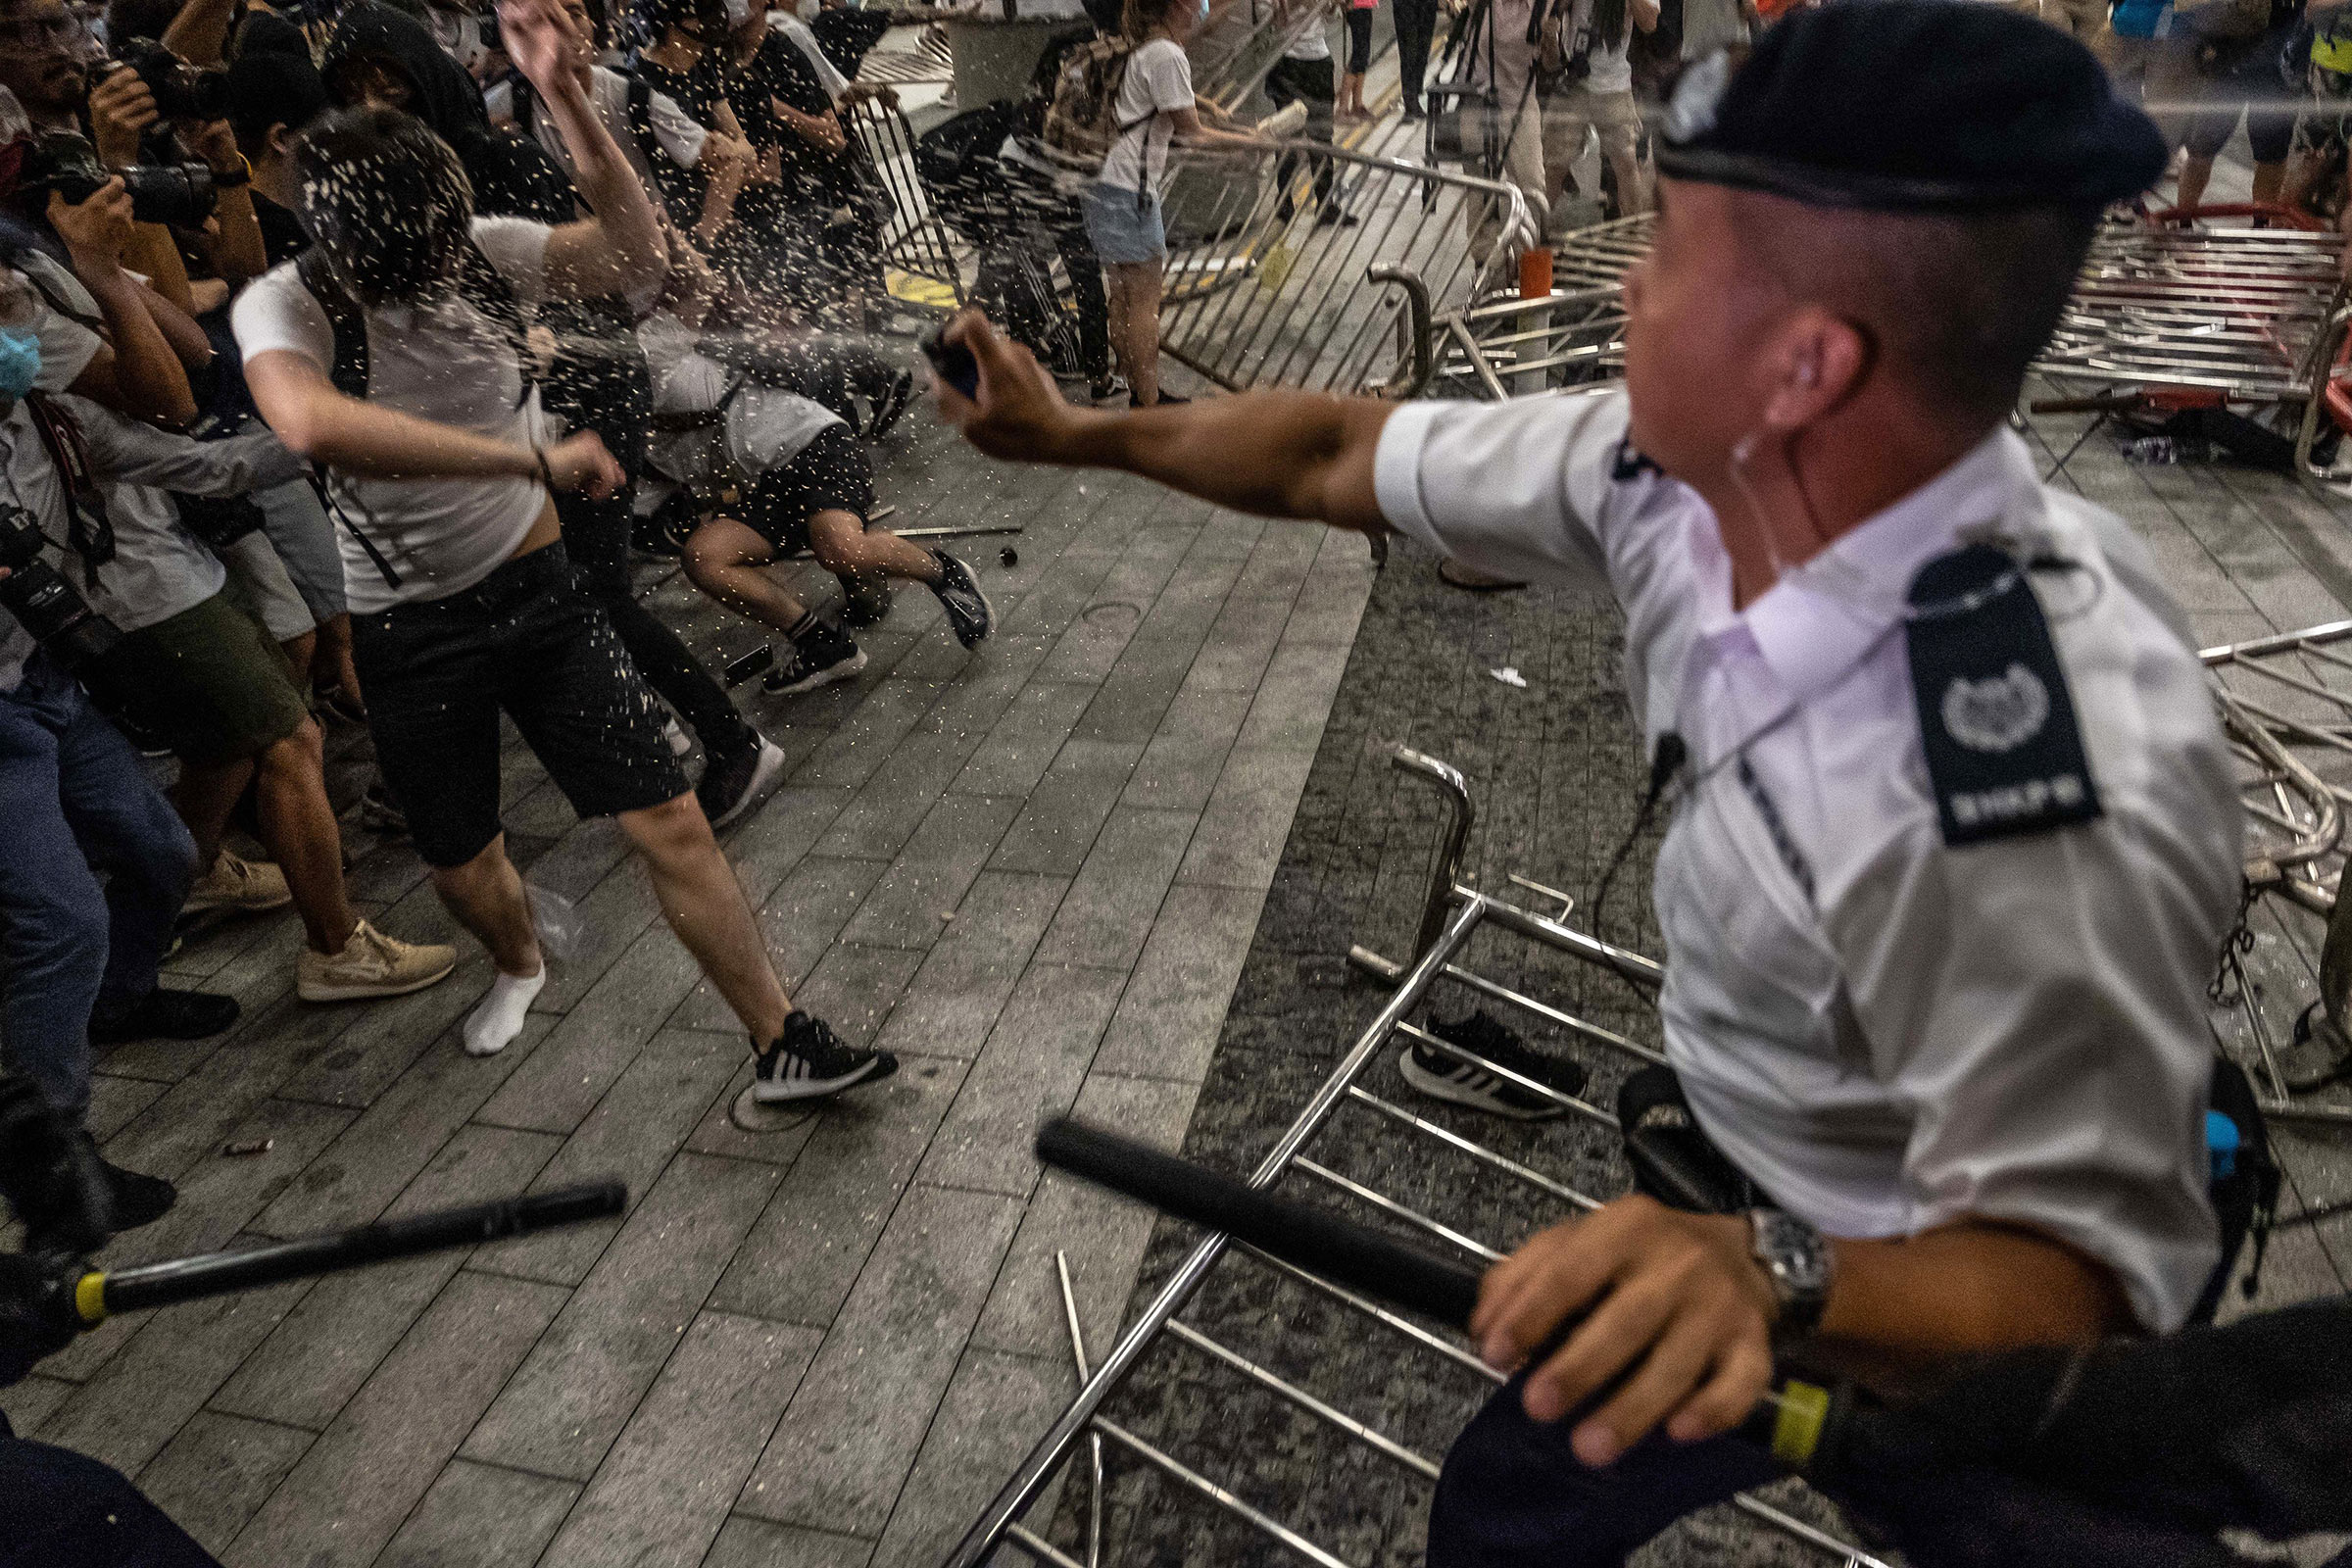 A police officer pepper-sprays demonstrators during a protest against the extradition law proposal on June 10. (Lam Yik Fei—The New York Times/Redux)